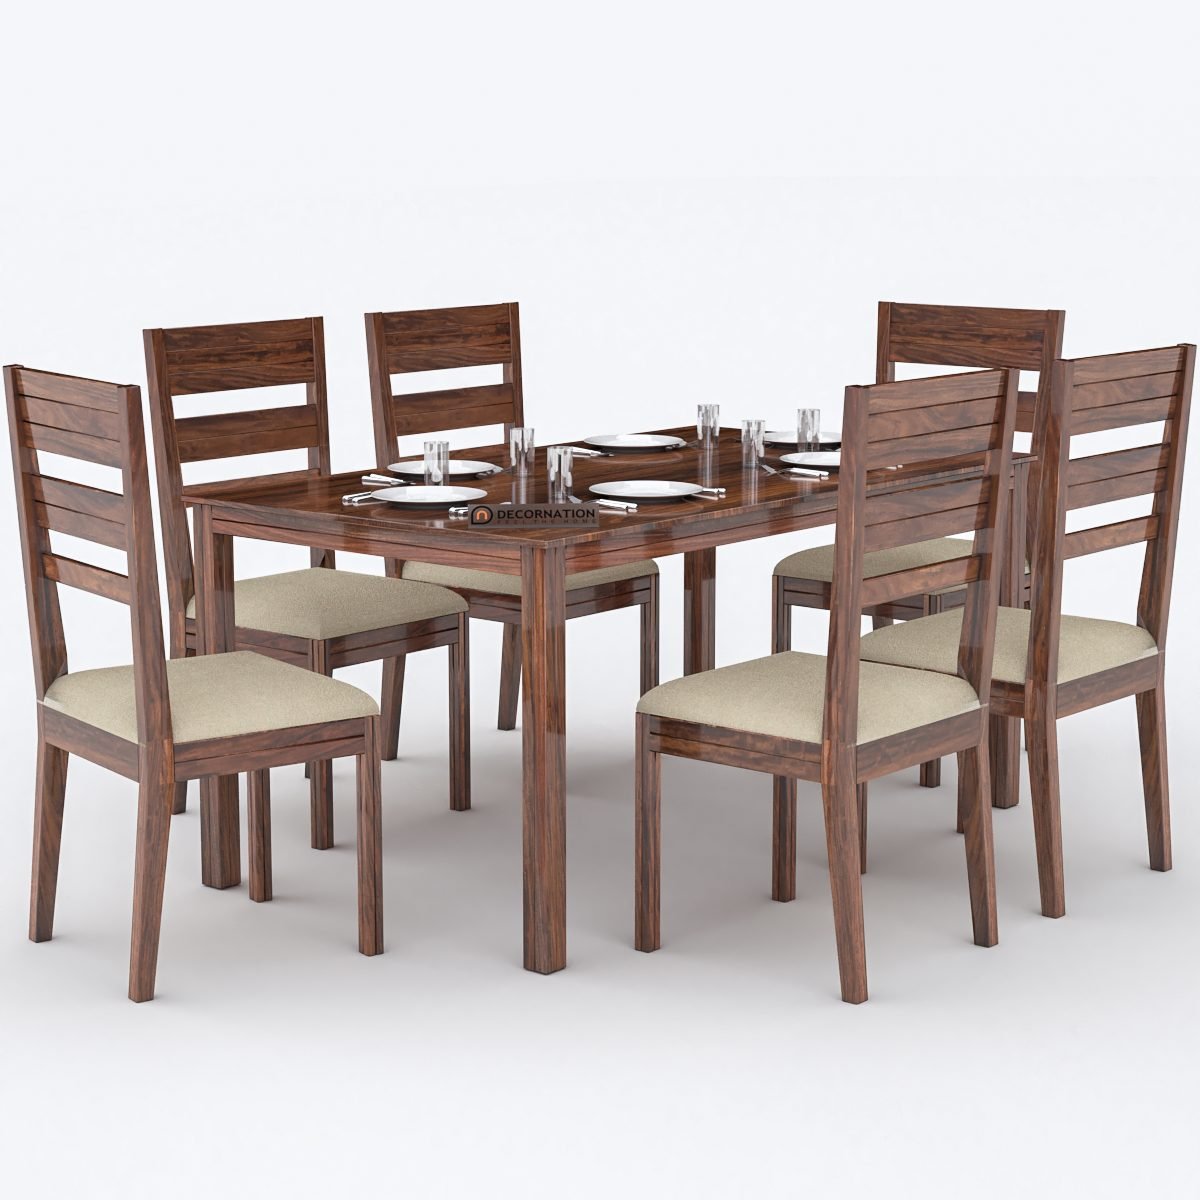 Luna Wooden 6 Seater Dining Table Set